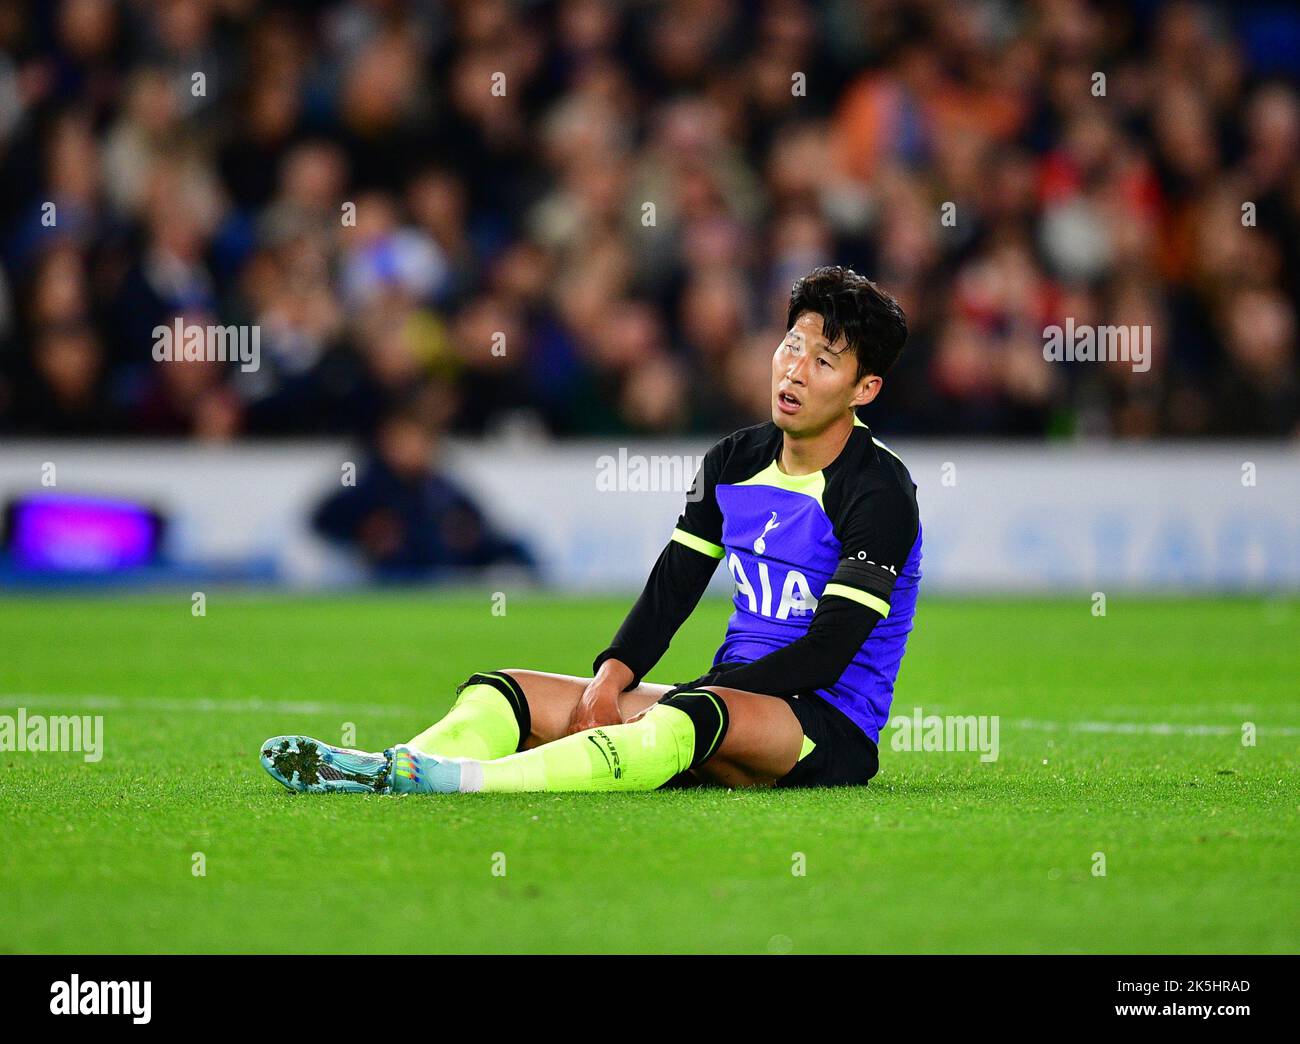 Brighton, UK. 08th Oct, 2022. Heung-Min Son of Tottenham Hotspur sits dismayed after missing out on scoring during the Premier League match between Brighton & Hove Albion and Tottenham Hotspur at The Amex on October 8th 2022 in Brighton, England. (Photo by Jeff Mood/phcimages.com) Credit: PHC Images/Alamy Live News Stock Photo